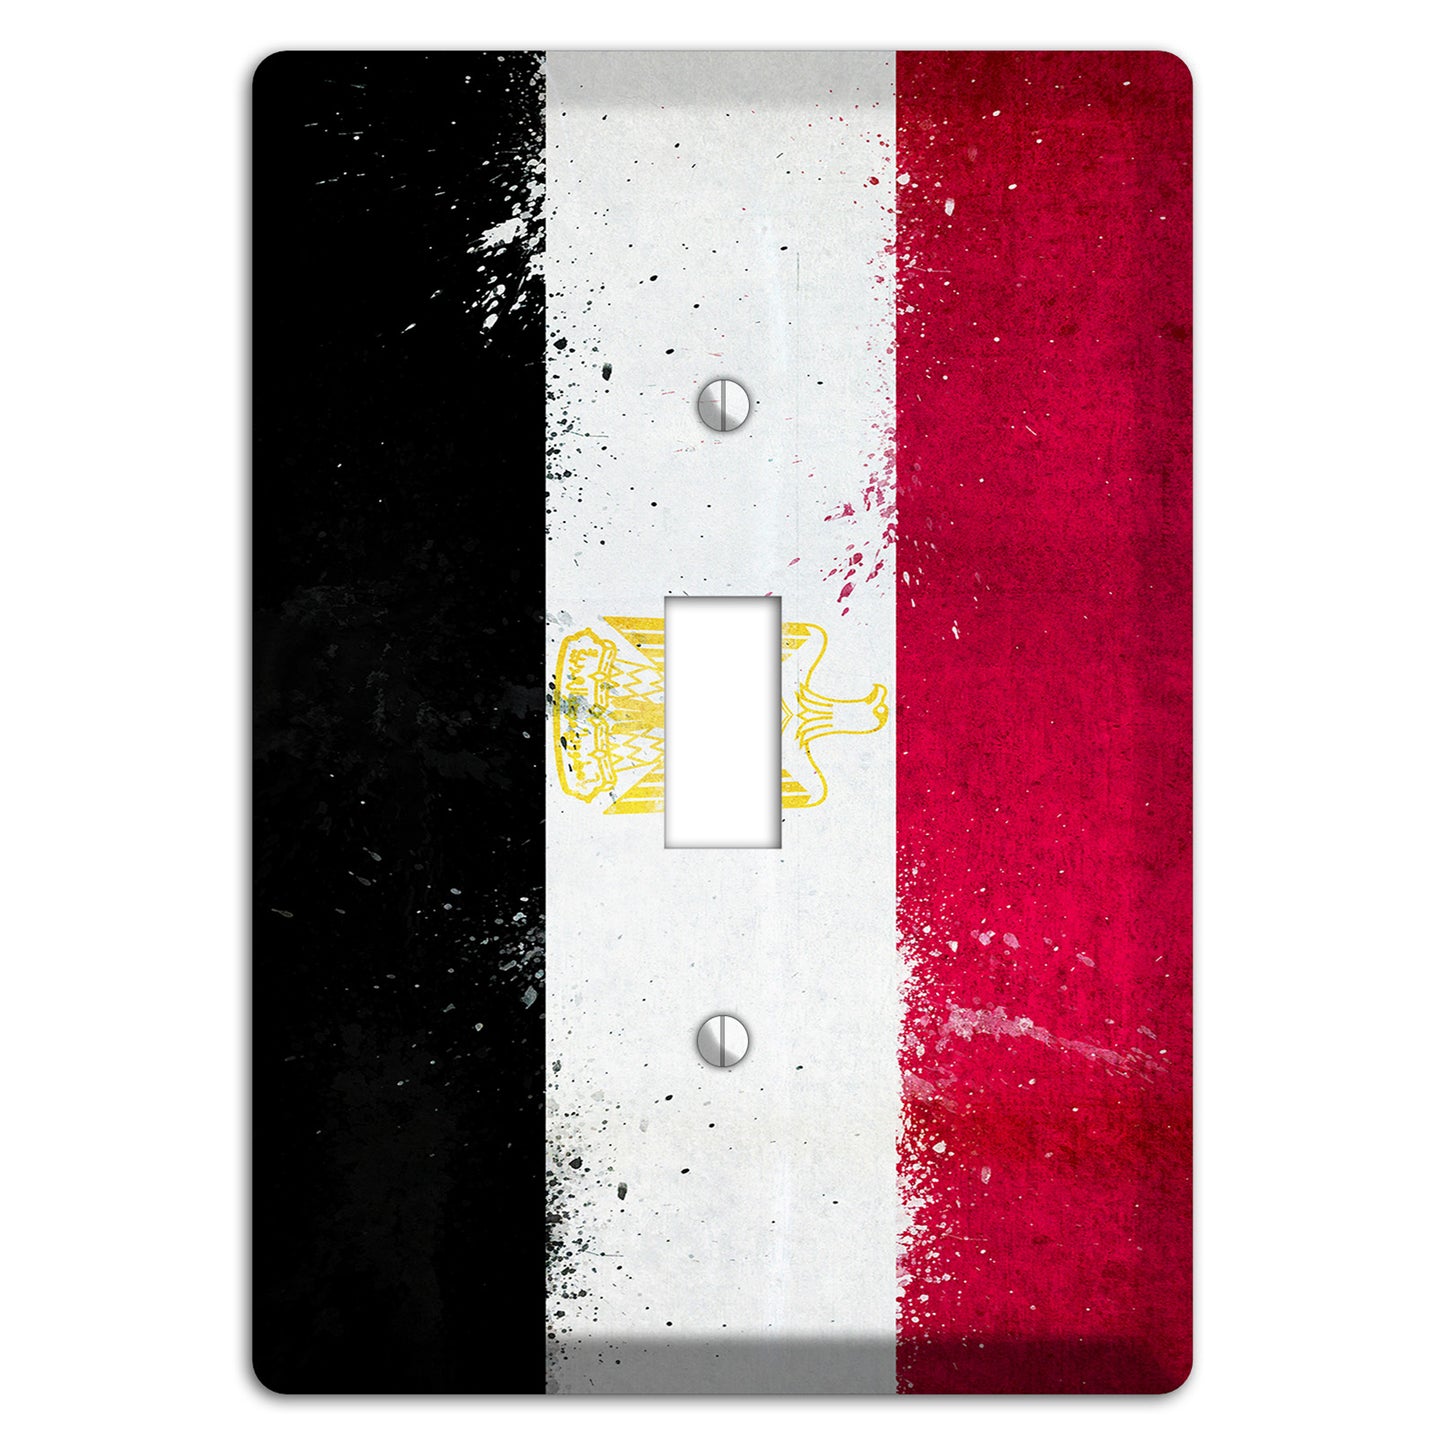 Egypt Cover Plates Cover Plates